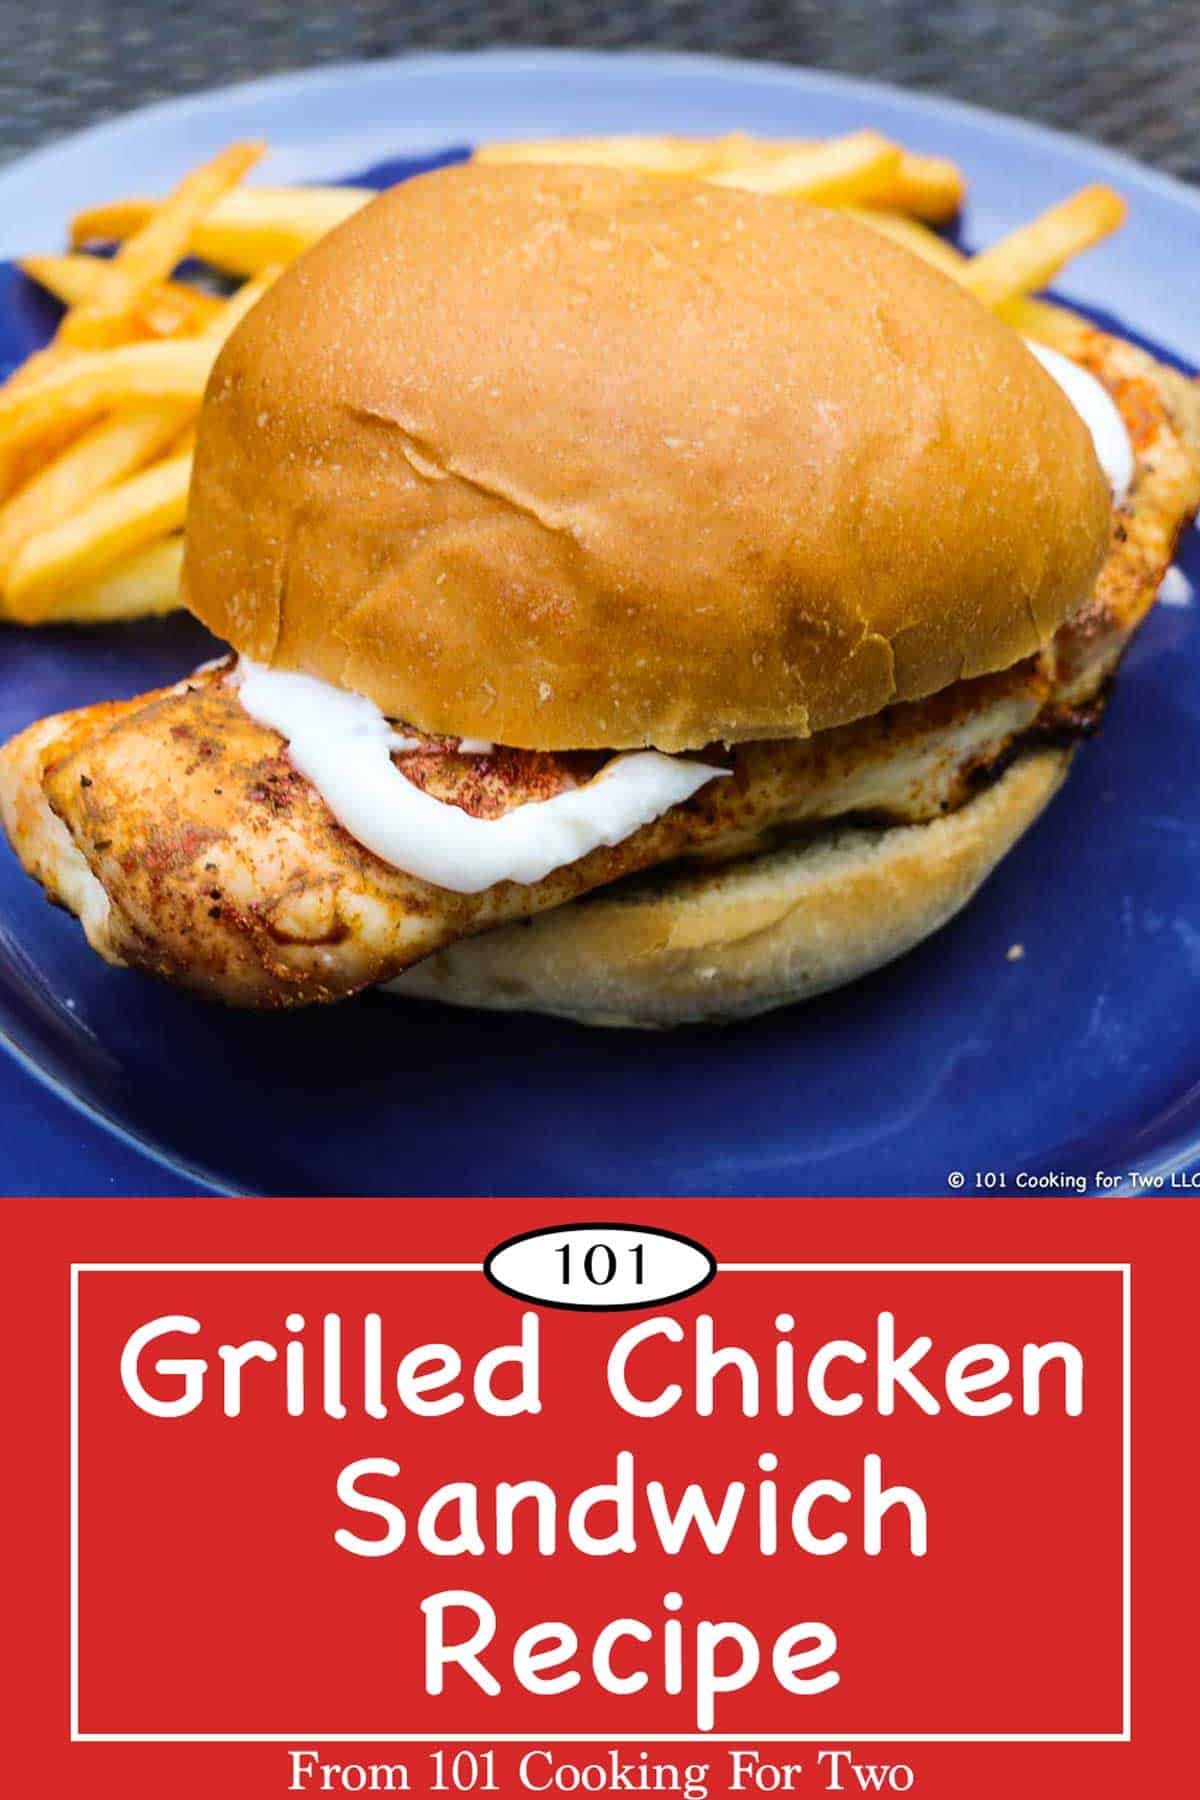 Grilled Chicken Sandwich Recipe - 101 Cooking For Two